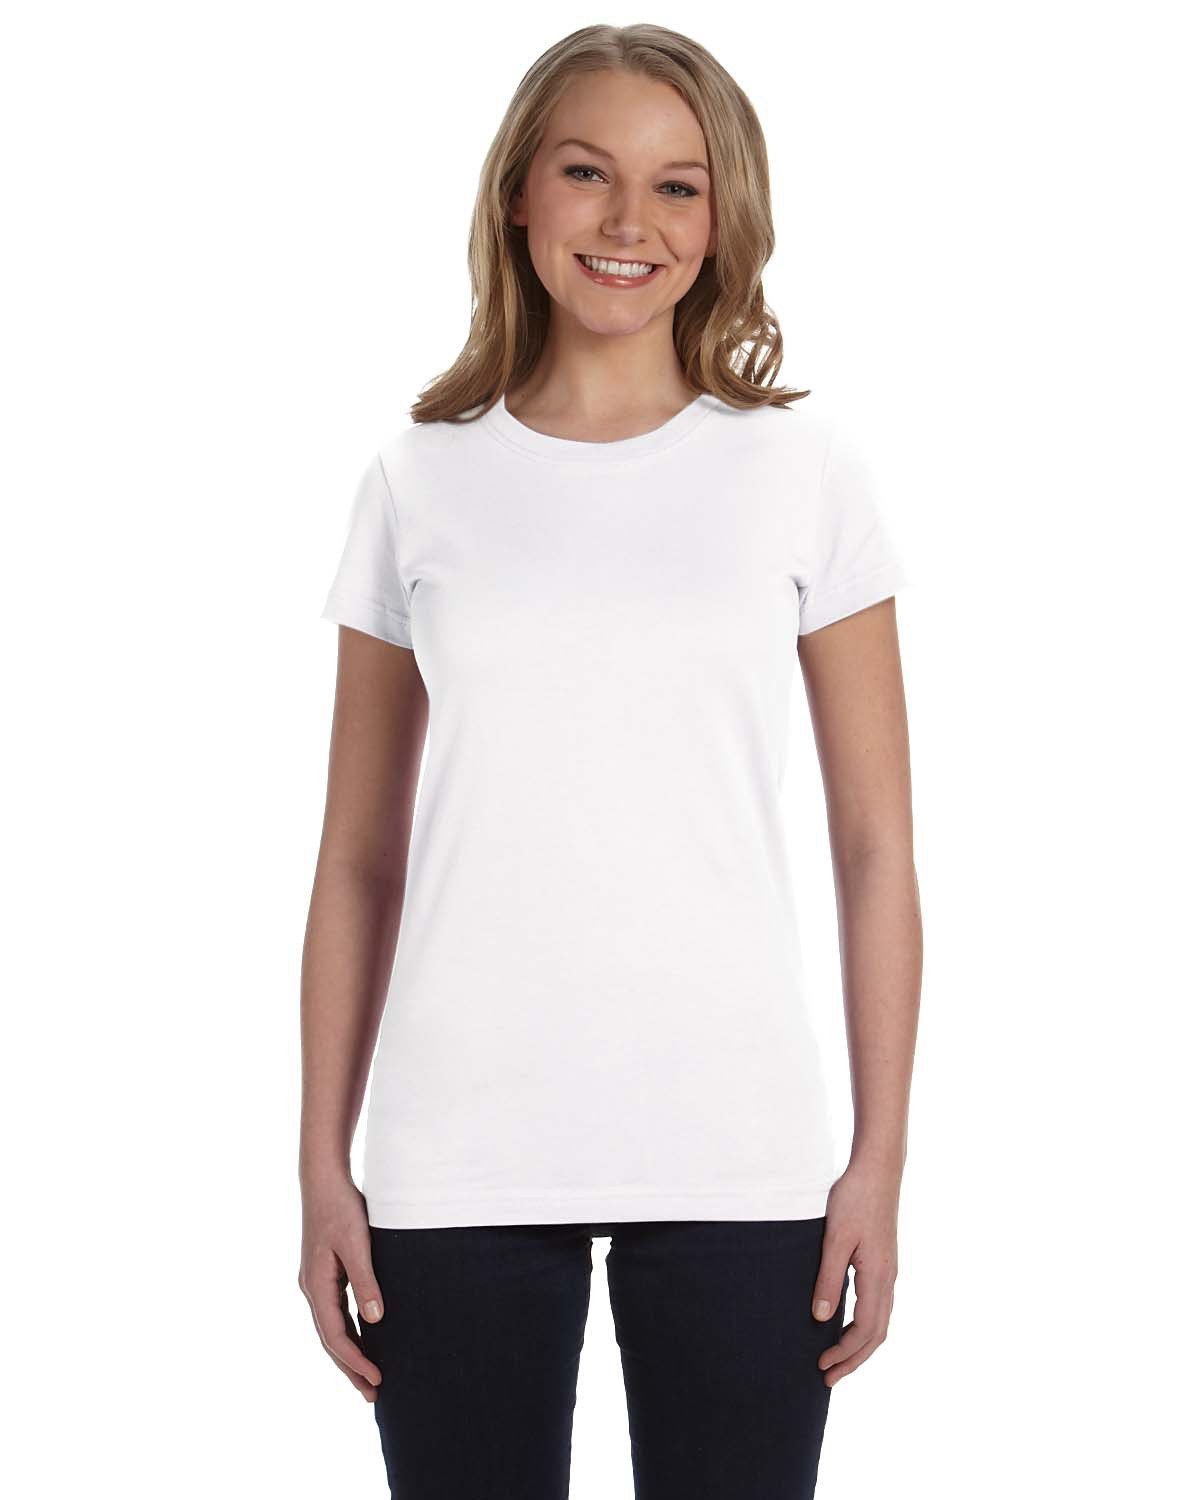 Front view of Ladies’ Junior Fit T-Shirt